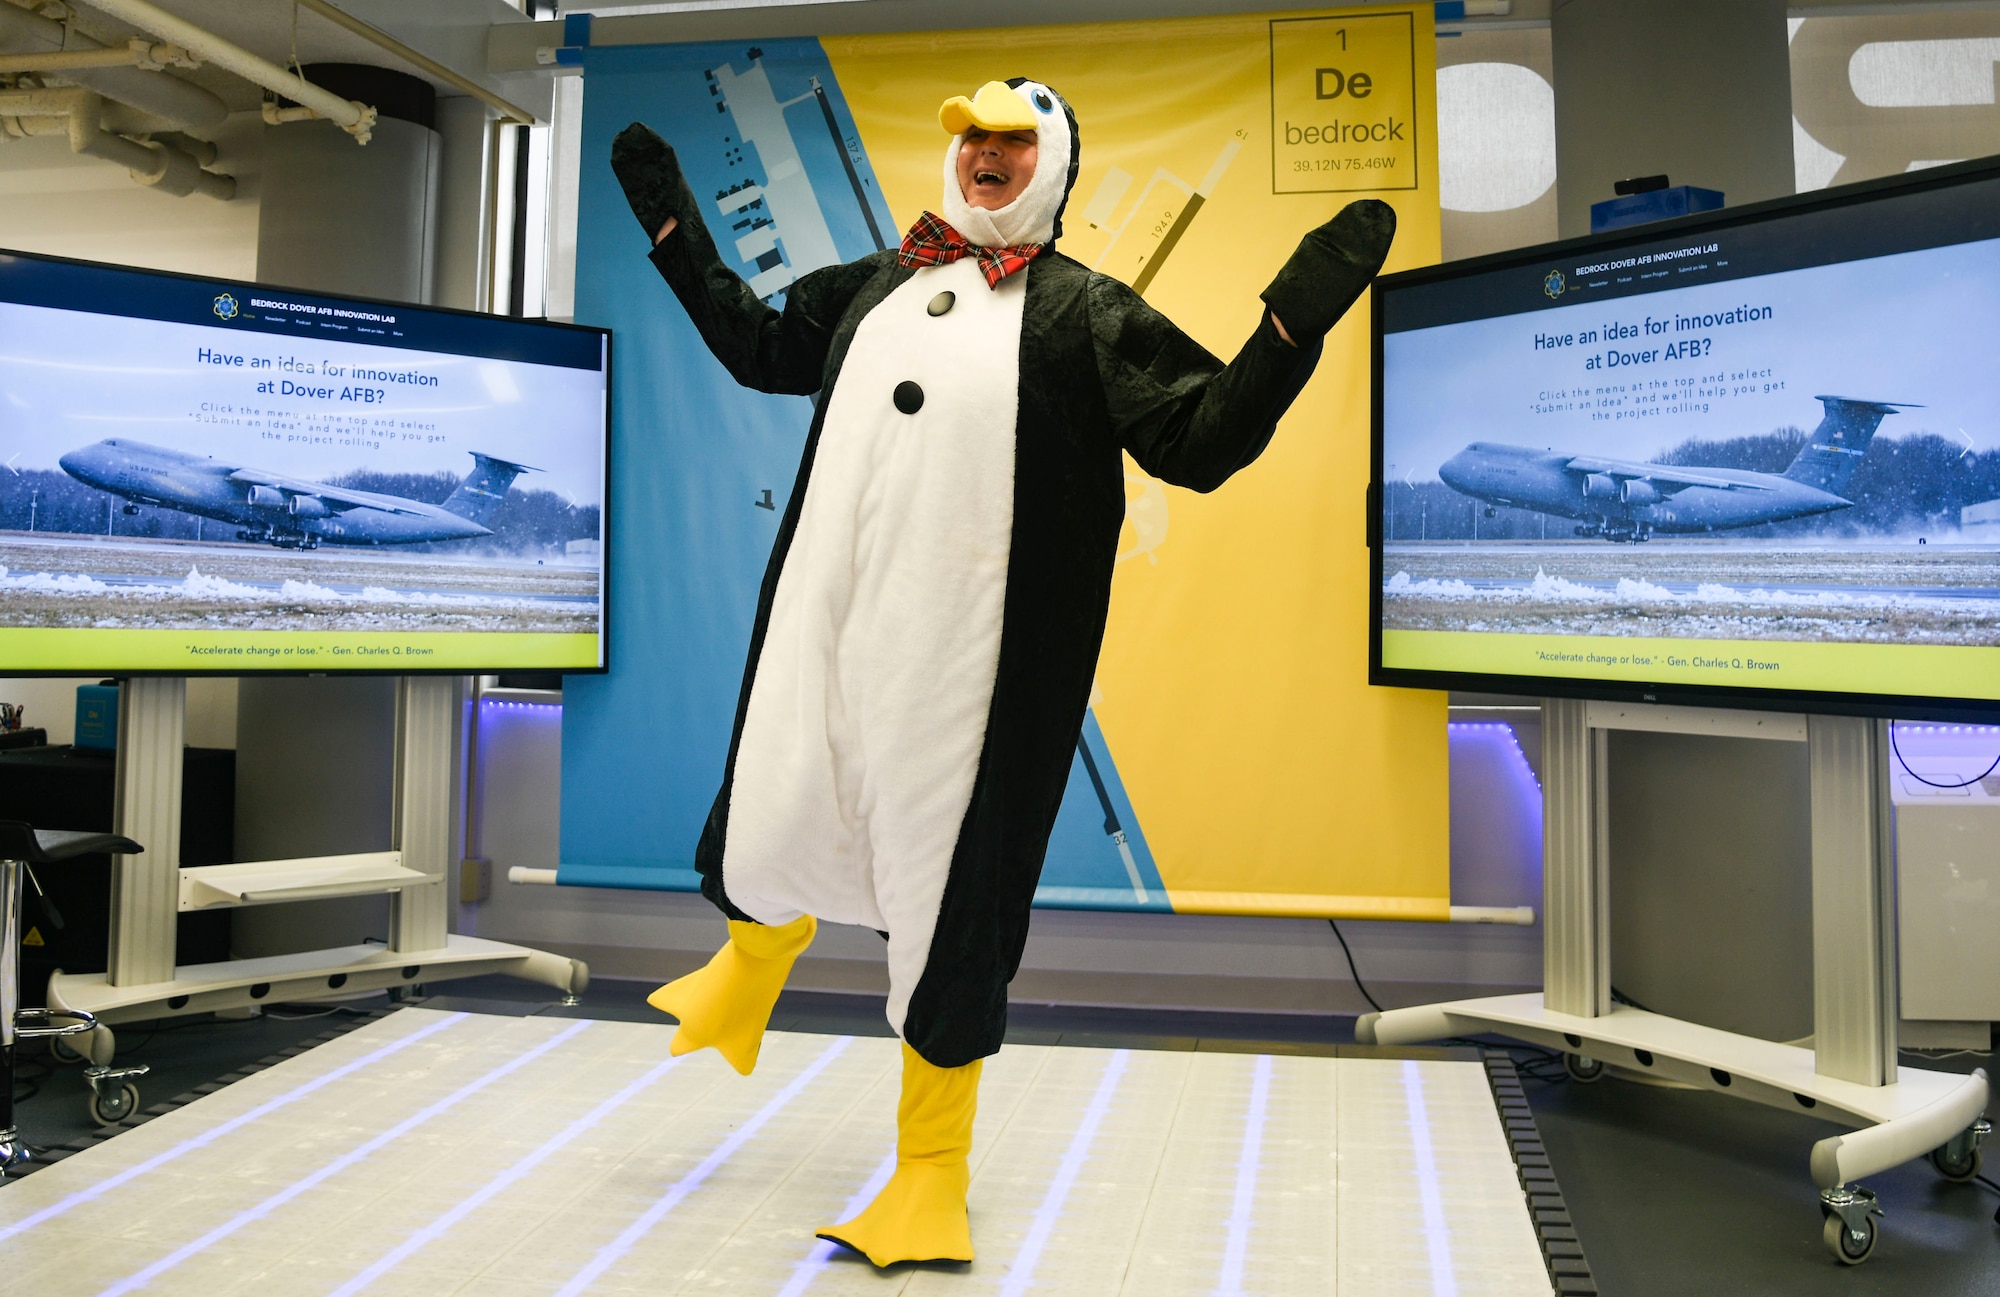 Maj. Nicholas Martini, 436th Airlift Wing chief innovation officer, makes his snowfall prediction in a penguin costume at the Bedrock Innovation Lab on Dover Air Force Base, Delaware, Oct. 31, 2022. Martini, a native of Cleveland, Ohio, predicted Dover AFB's first snowfall of a quarter-inch or greater will occur Dec. 29, 2022. (U.S. Air Force photo by Senior Airman Joshua LeRoi)